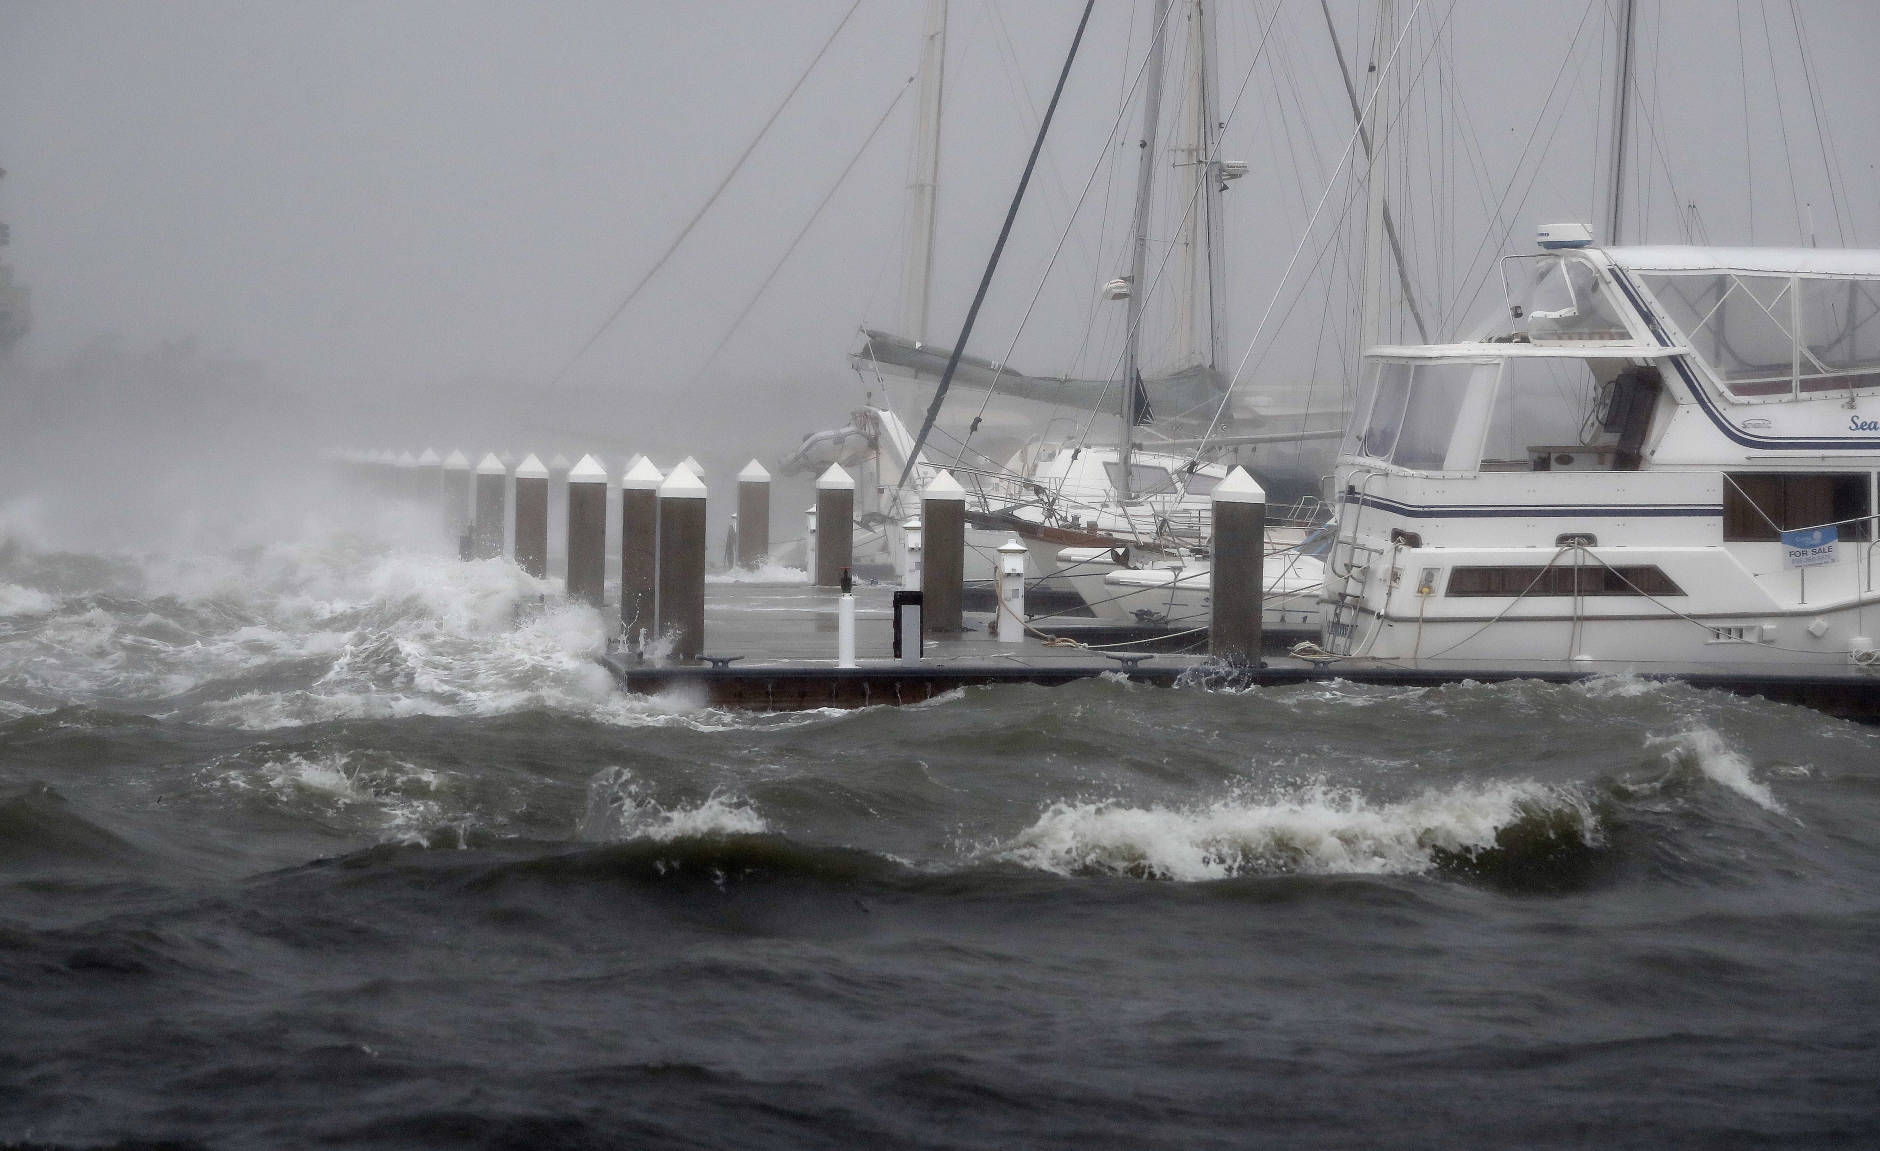 Waves from Hurricane Matthew batter a boat dock Friday, Oct. 7, 2016, in St. Augustine , Fla.  Matthew was downgraded to a Category 3 hurricane overnight, and its storm center hung just offshore as it moved up the Florida coastline, sparing communities its full 120 mph winds.  (AP Photo/John Bazemore)